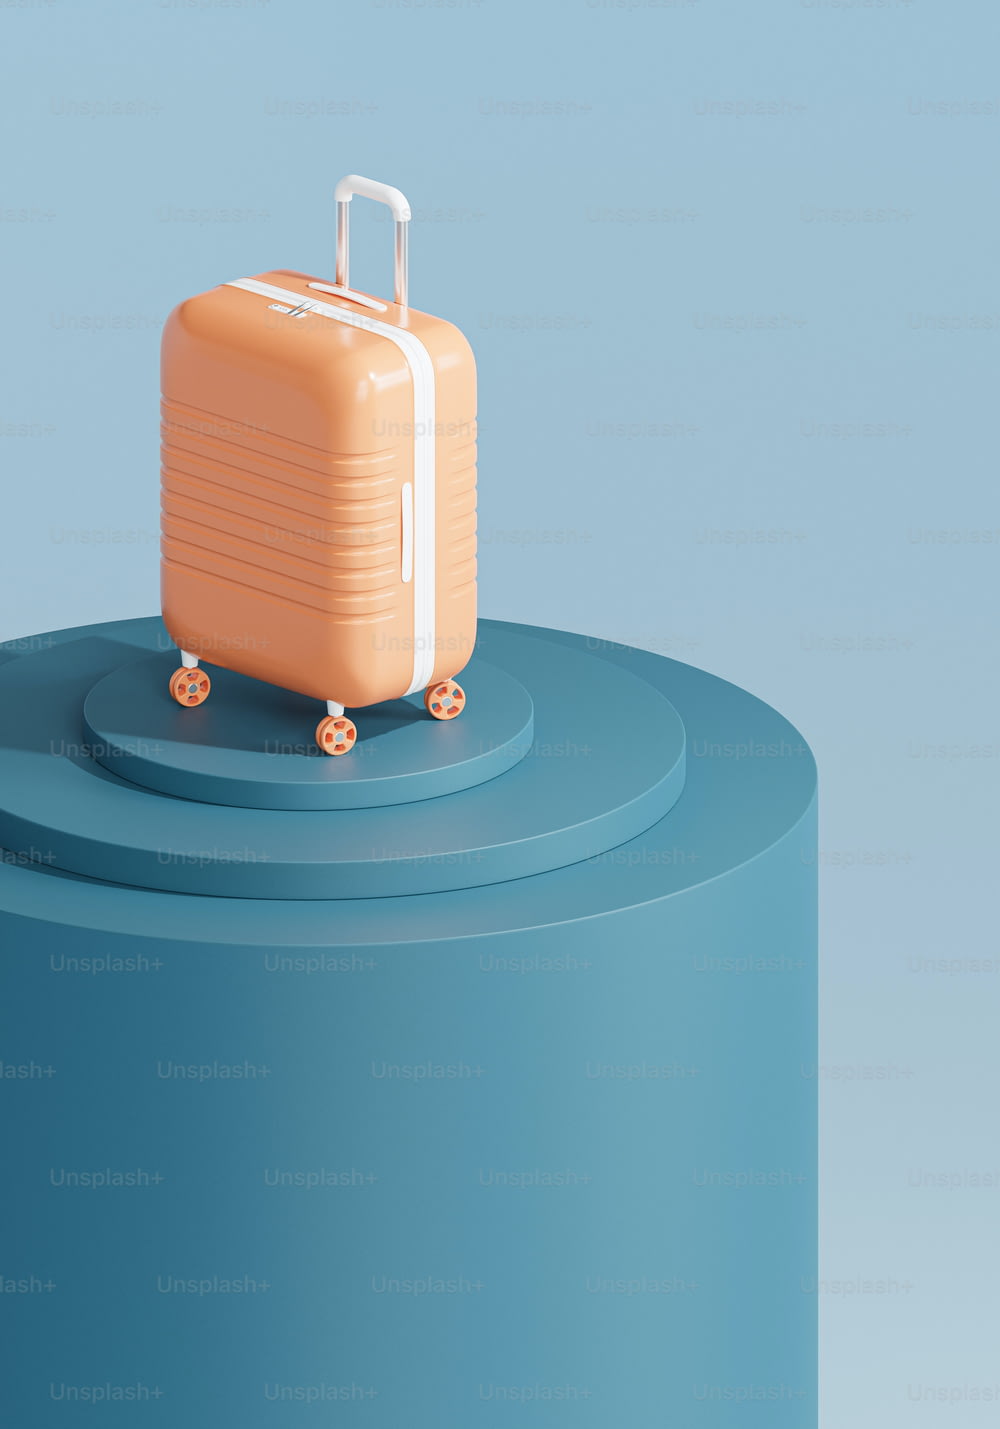 a piece of luggage sitting on top of a blue object